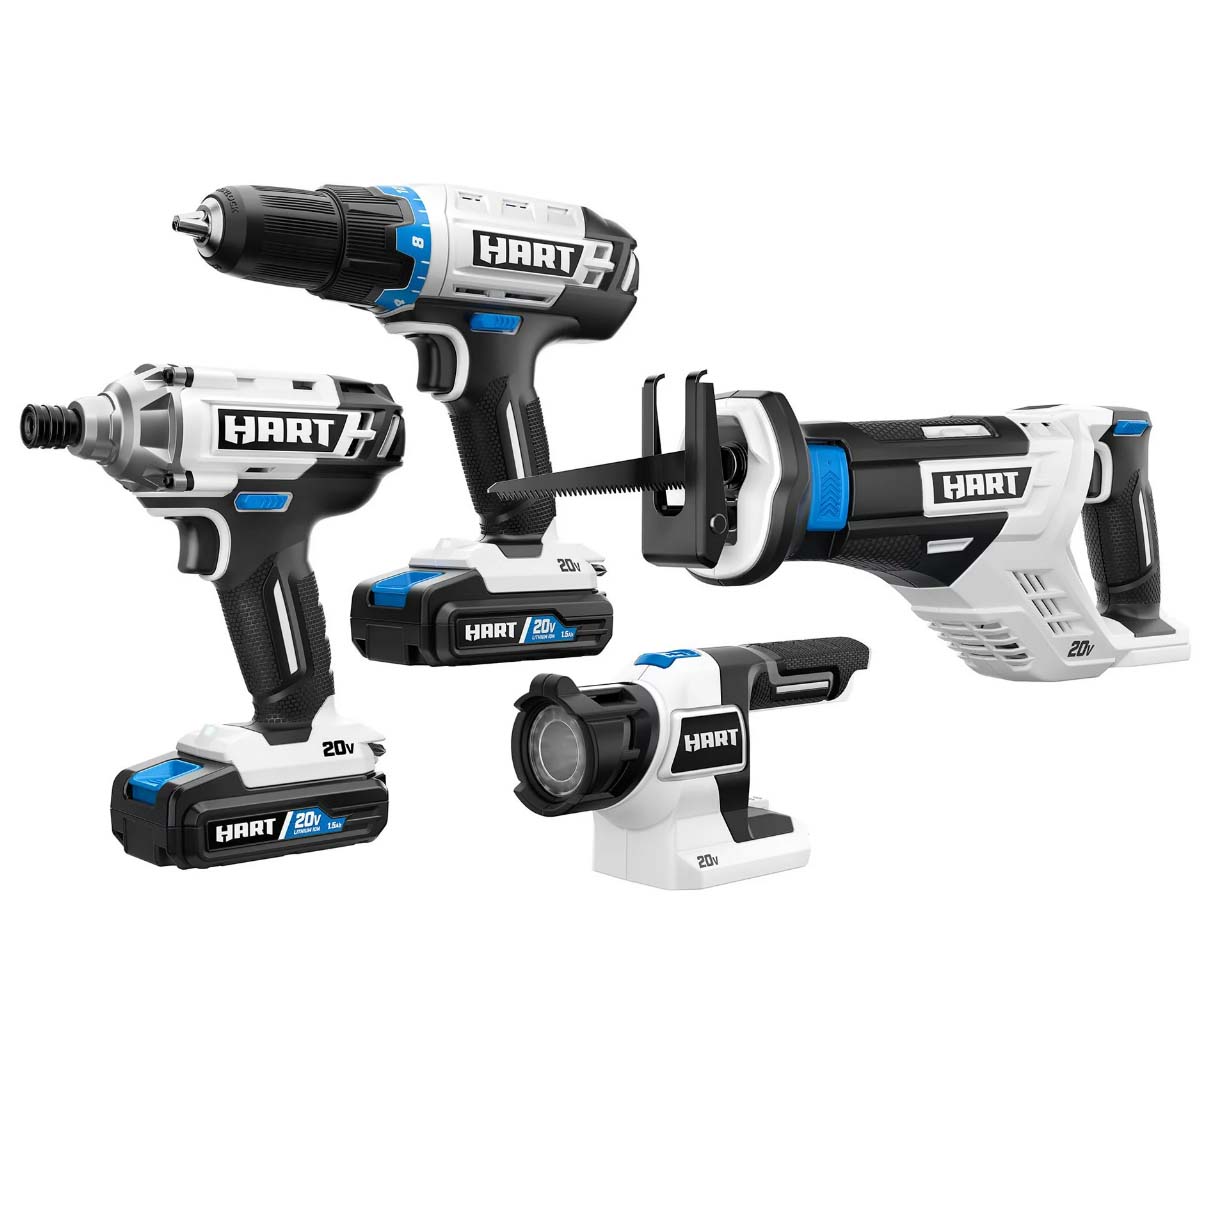 Image of four power tools in white, black and blue